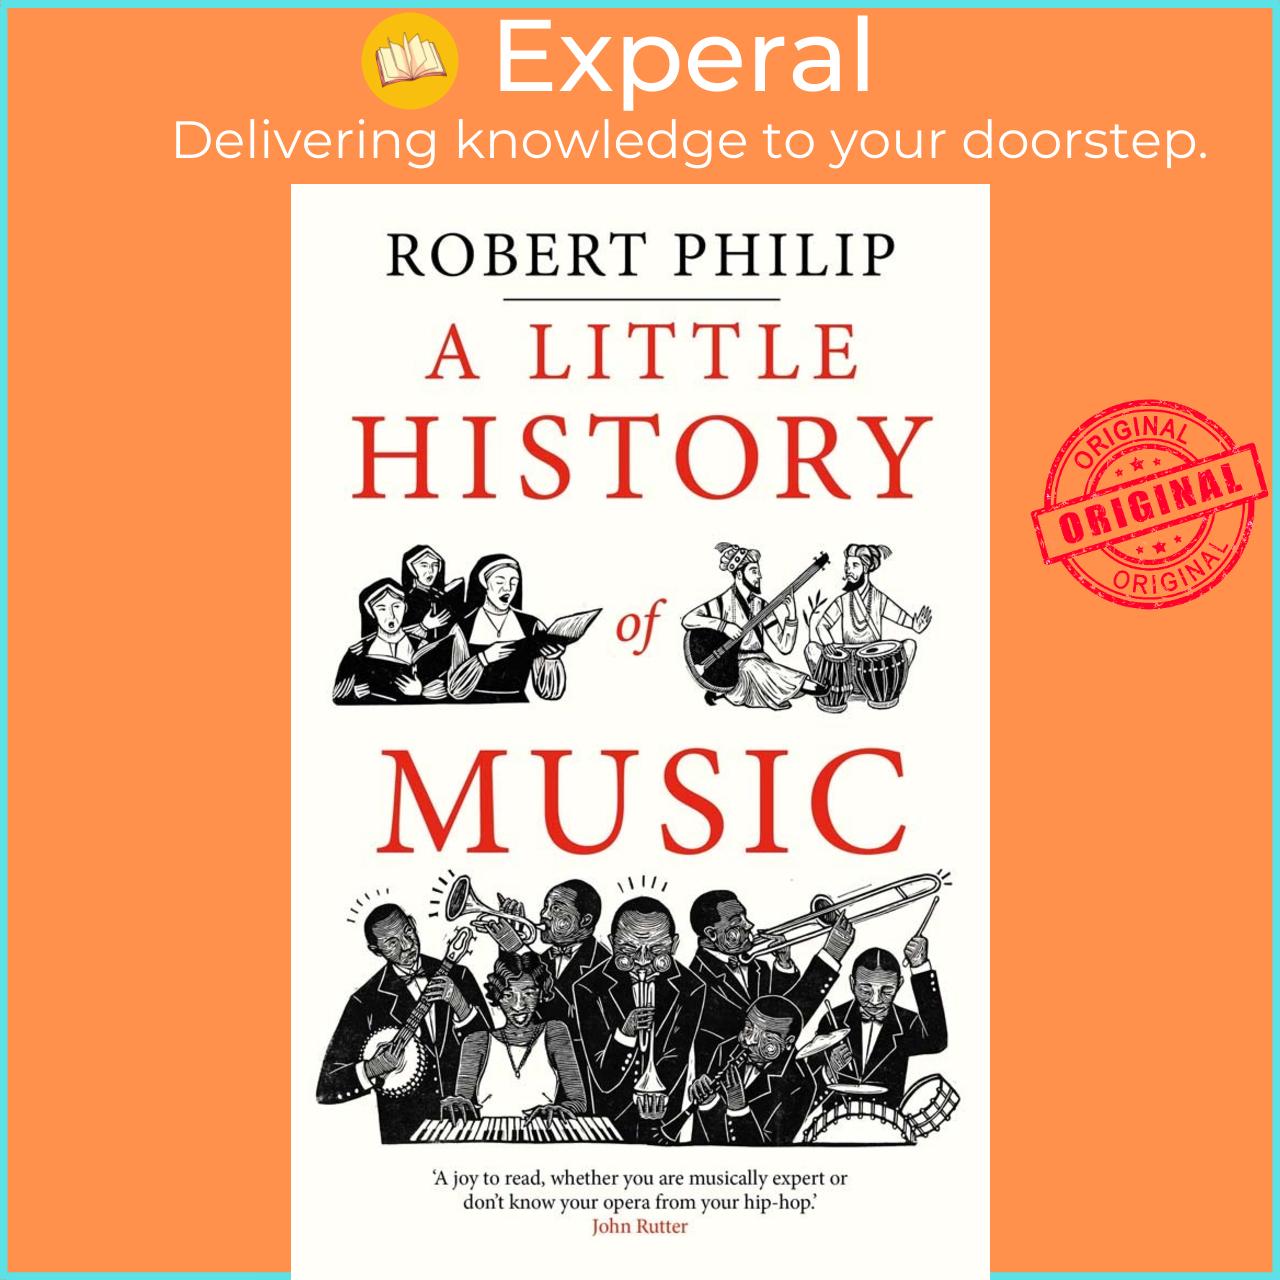 Sách - A Little History of Music by Robert Philip (US edition, hardcover)